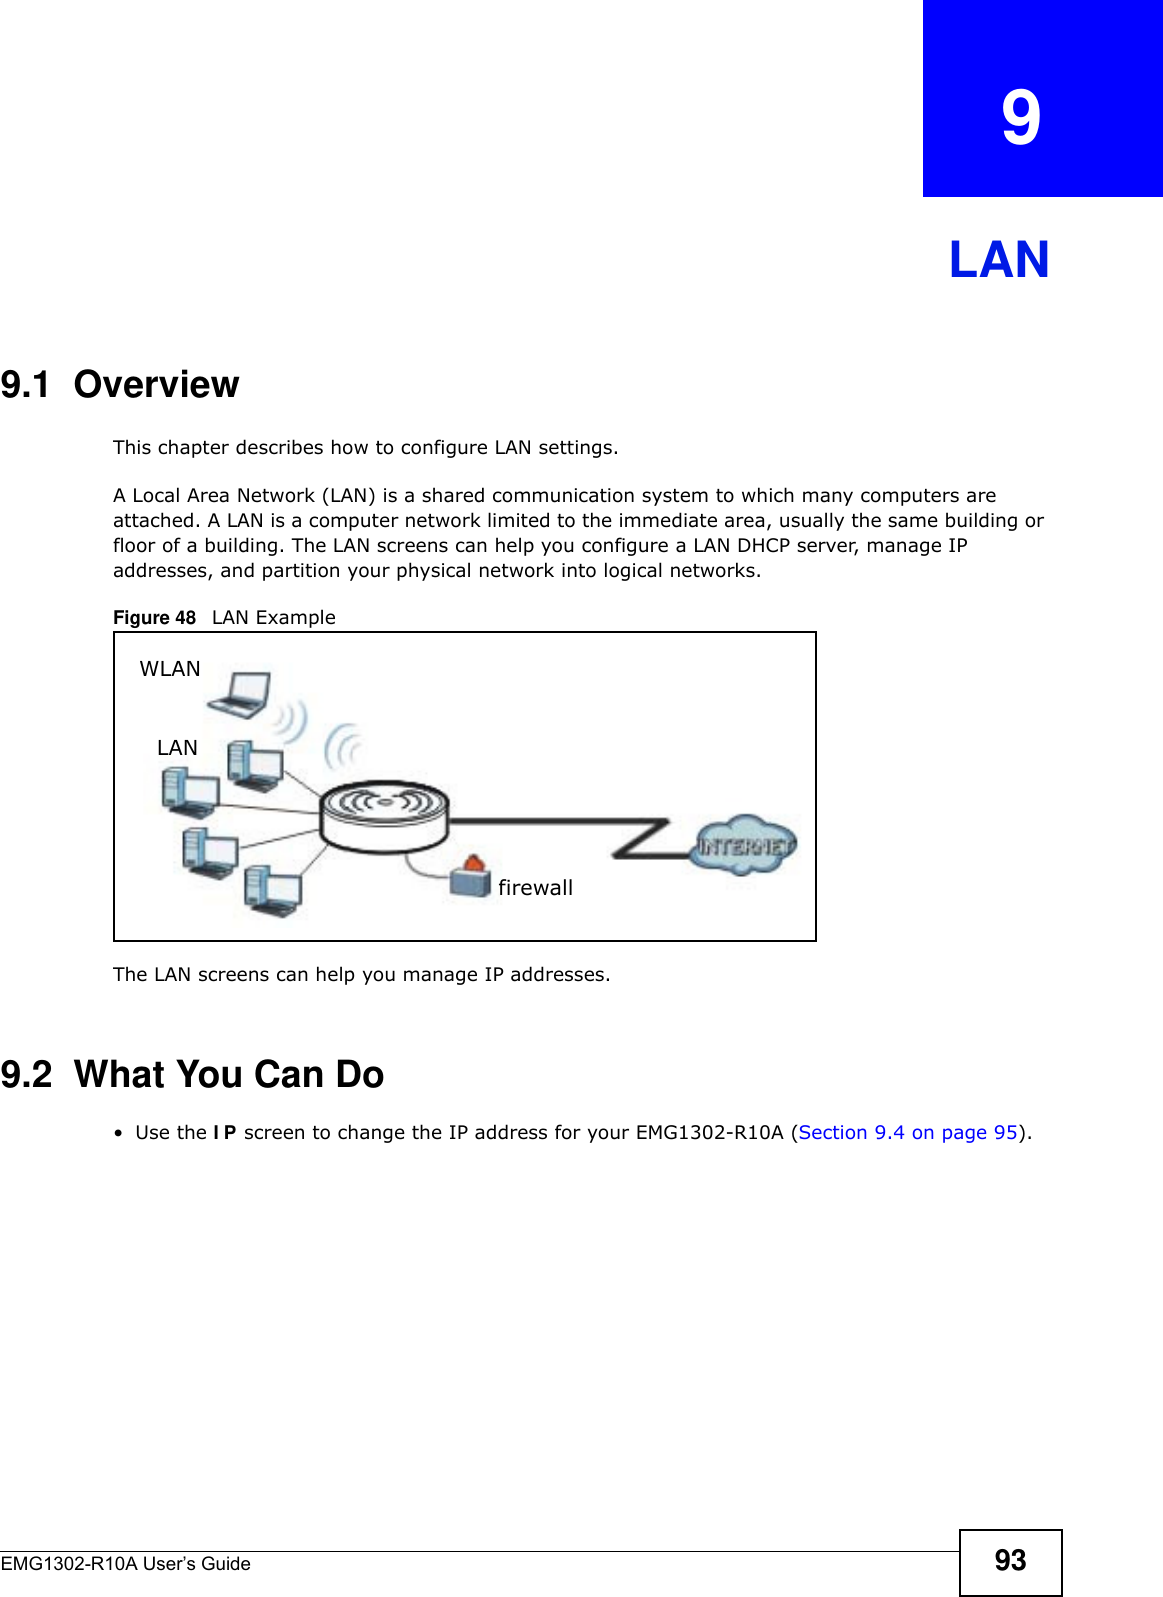 EMG1302-R10A User’s Guide 93CHAPTER   9LAN9.1  OverviewThis chapter describes how to configure LAN settings.A Local Area Network (LAN) is a shared communication system to which many computers are attached. A LAN is a computer network limited to the immediate area, usually the same building or floor of a building. The LAN screens can help you configure a LAN DHCP server, manage IP addresses, and partition your physical network into logical networks.Figure 48   LAN ExampleThe LAN screens can help you manage IP addresses.9.2  What You Can Do•Use the I P screen to change the IP address for your EMG1302-R10A (Section 9.4 on page 95).WLANLANfirewall